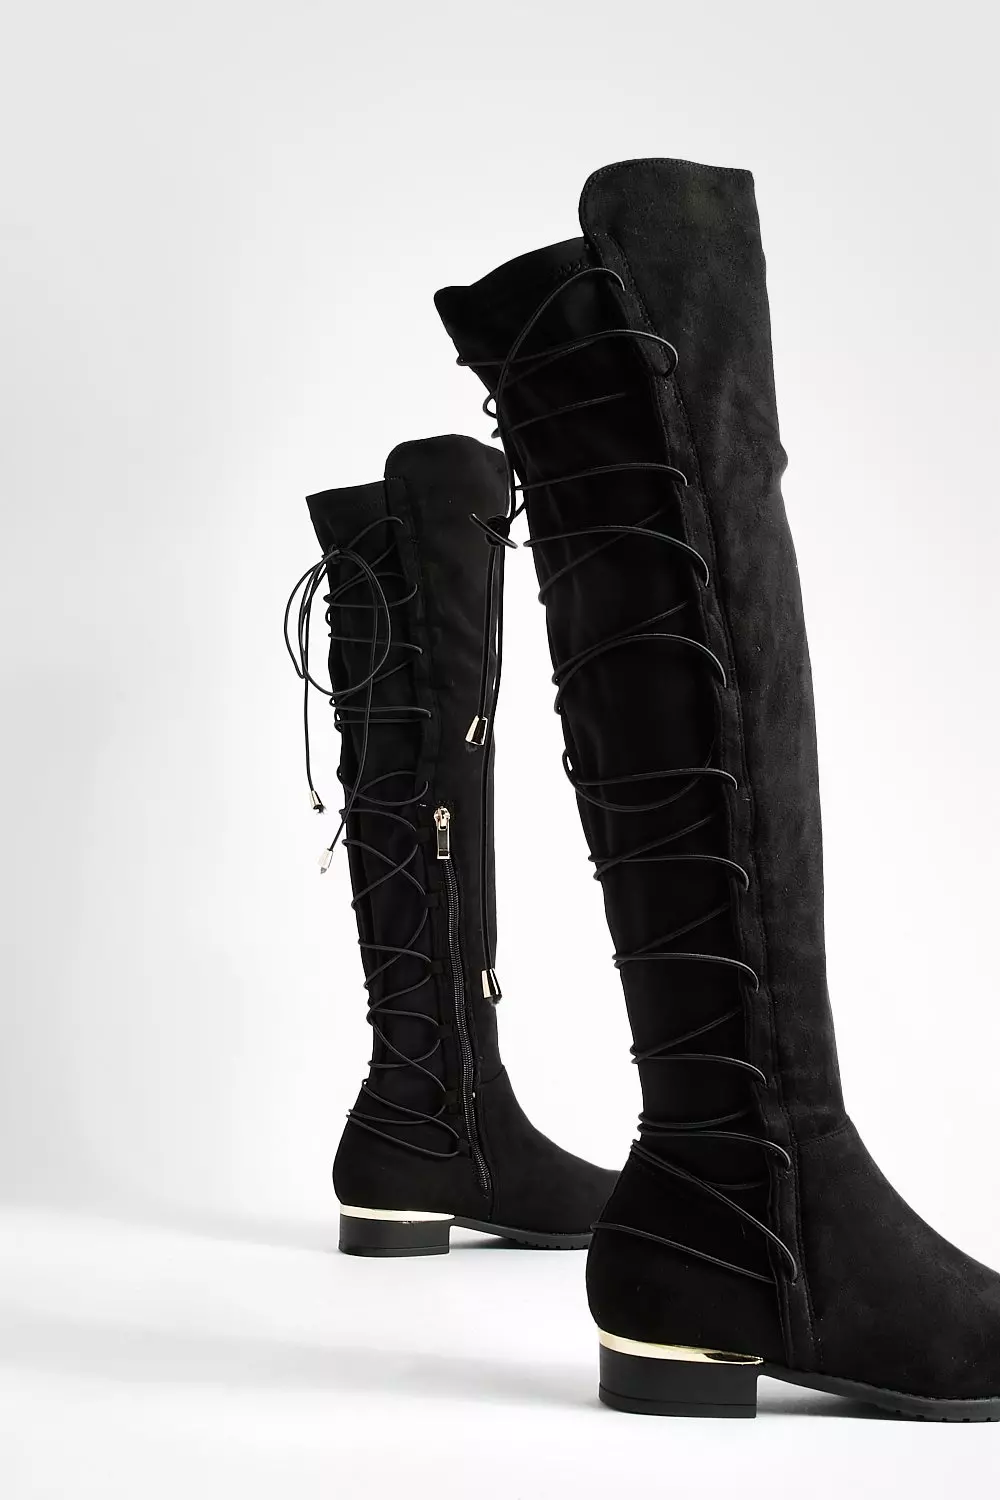 boohoo Bungee Lace Back Knee High Boots - Black - Size 9